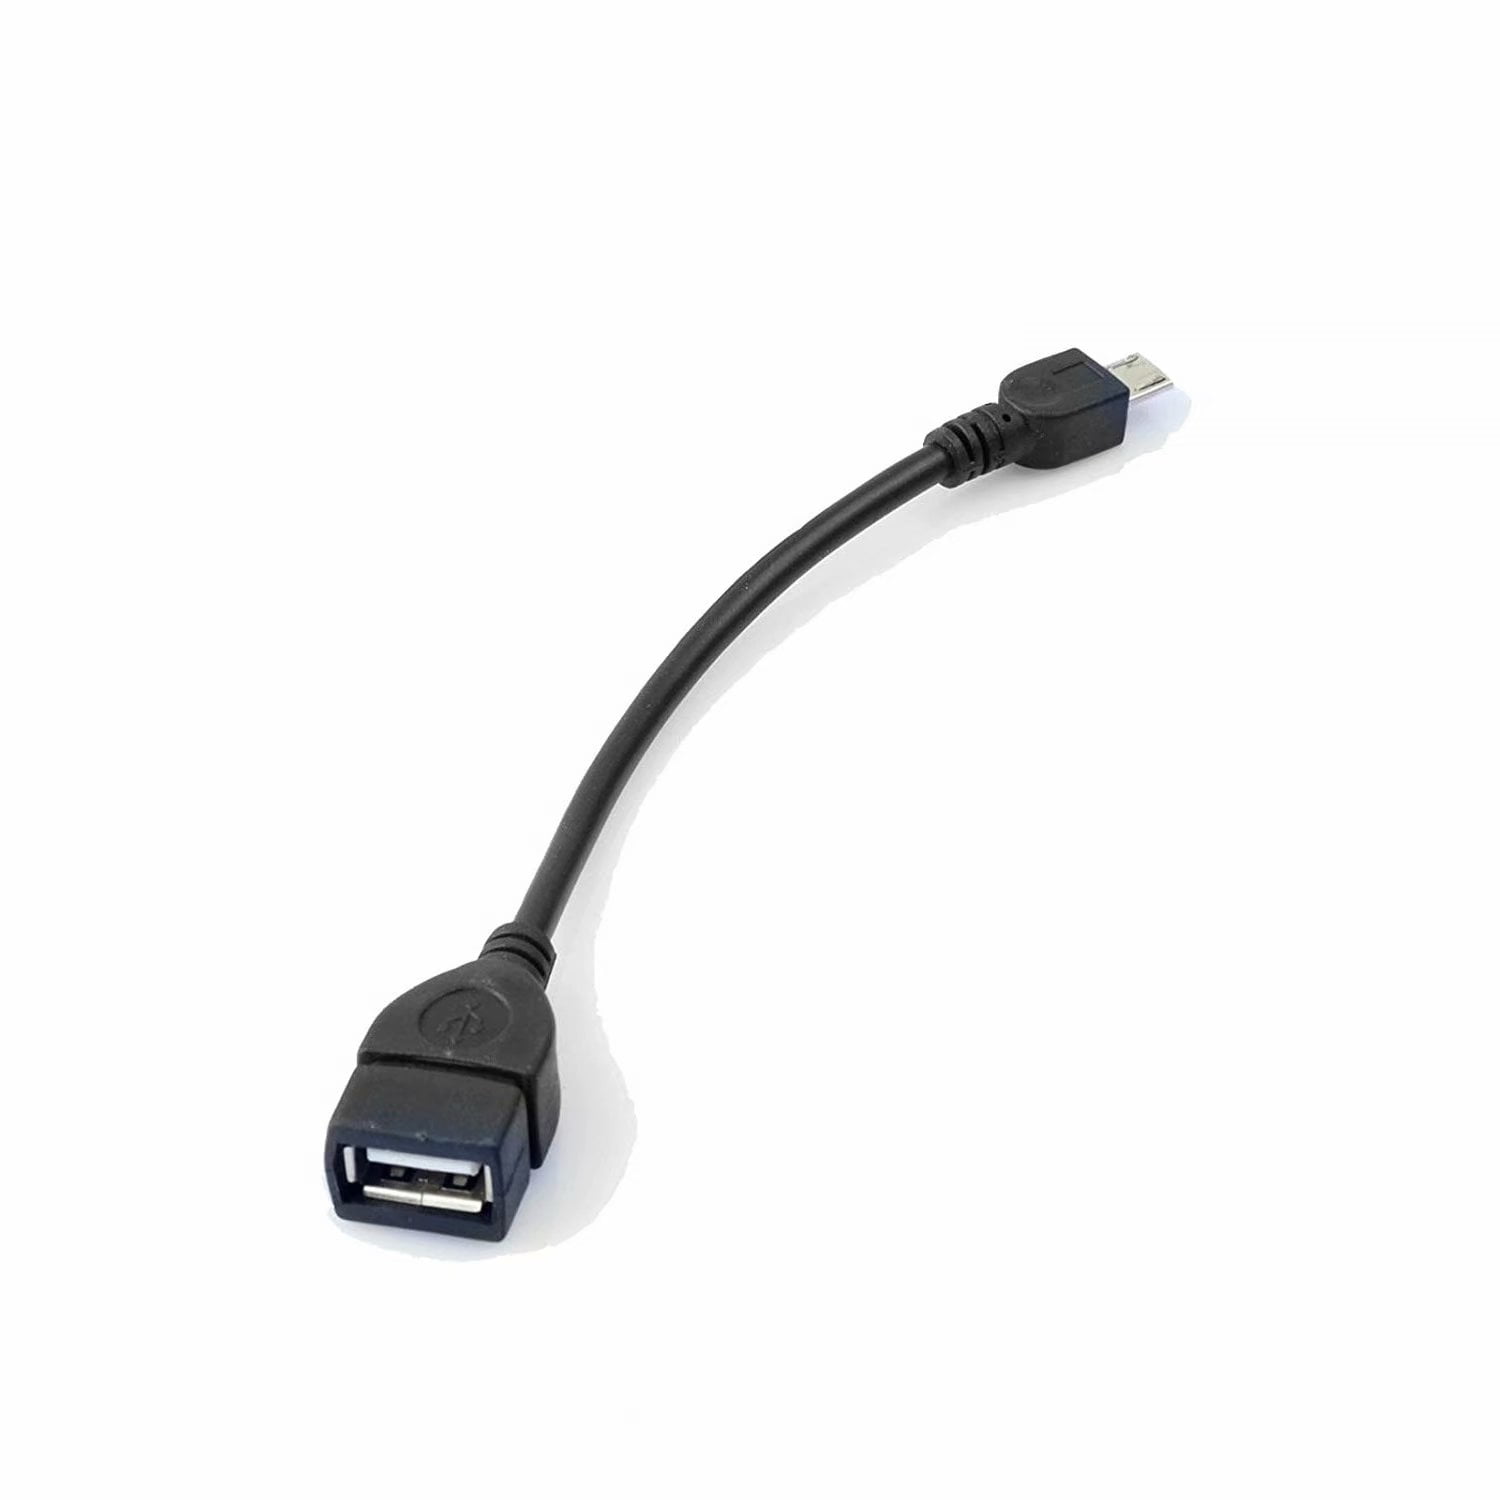 PRO OTG Cable Works for LG SP320 Right Angle Cable Connects You to Any Compatible USB Device with MicroUSB Cable! 